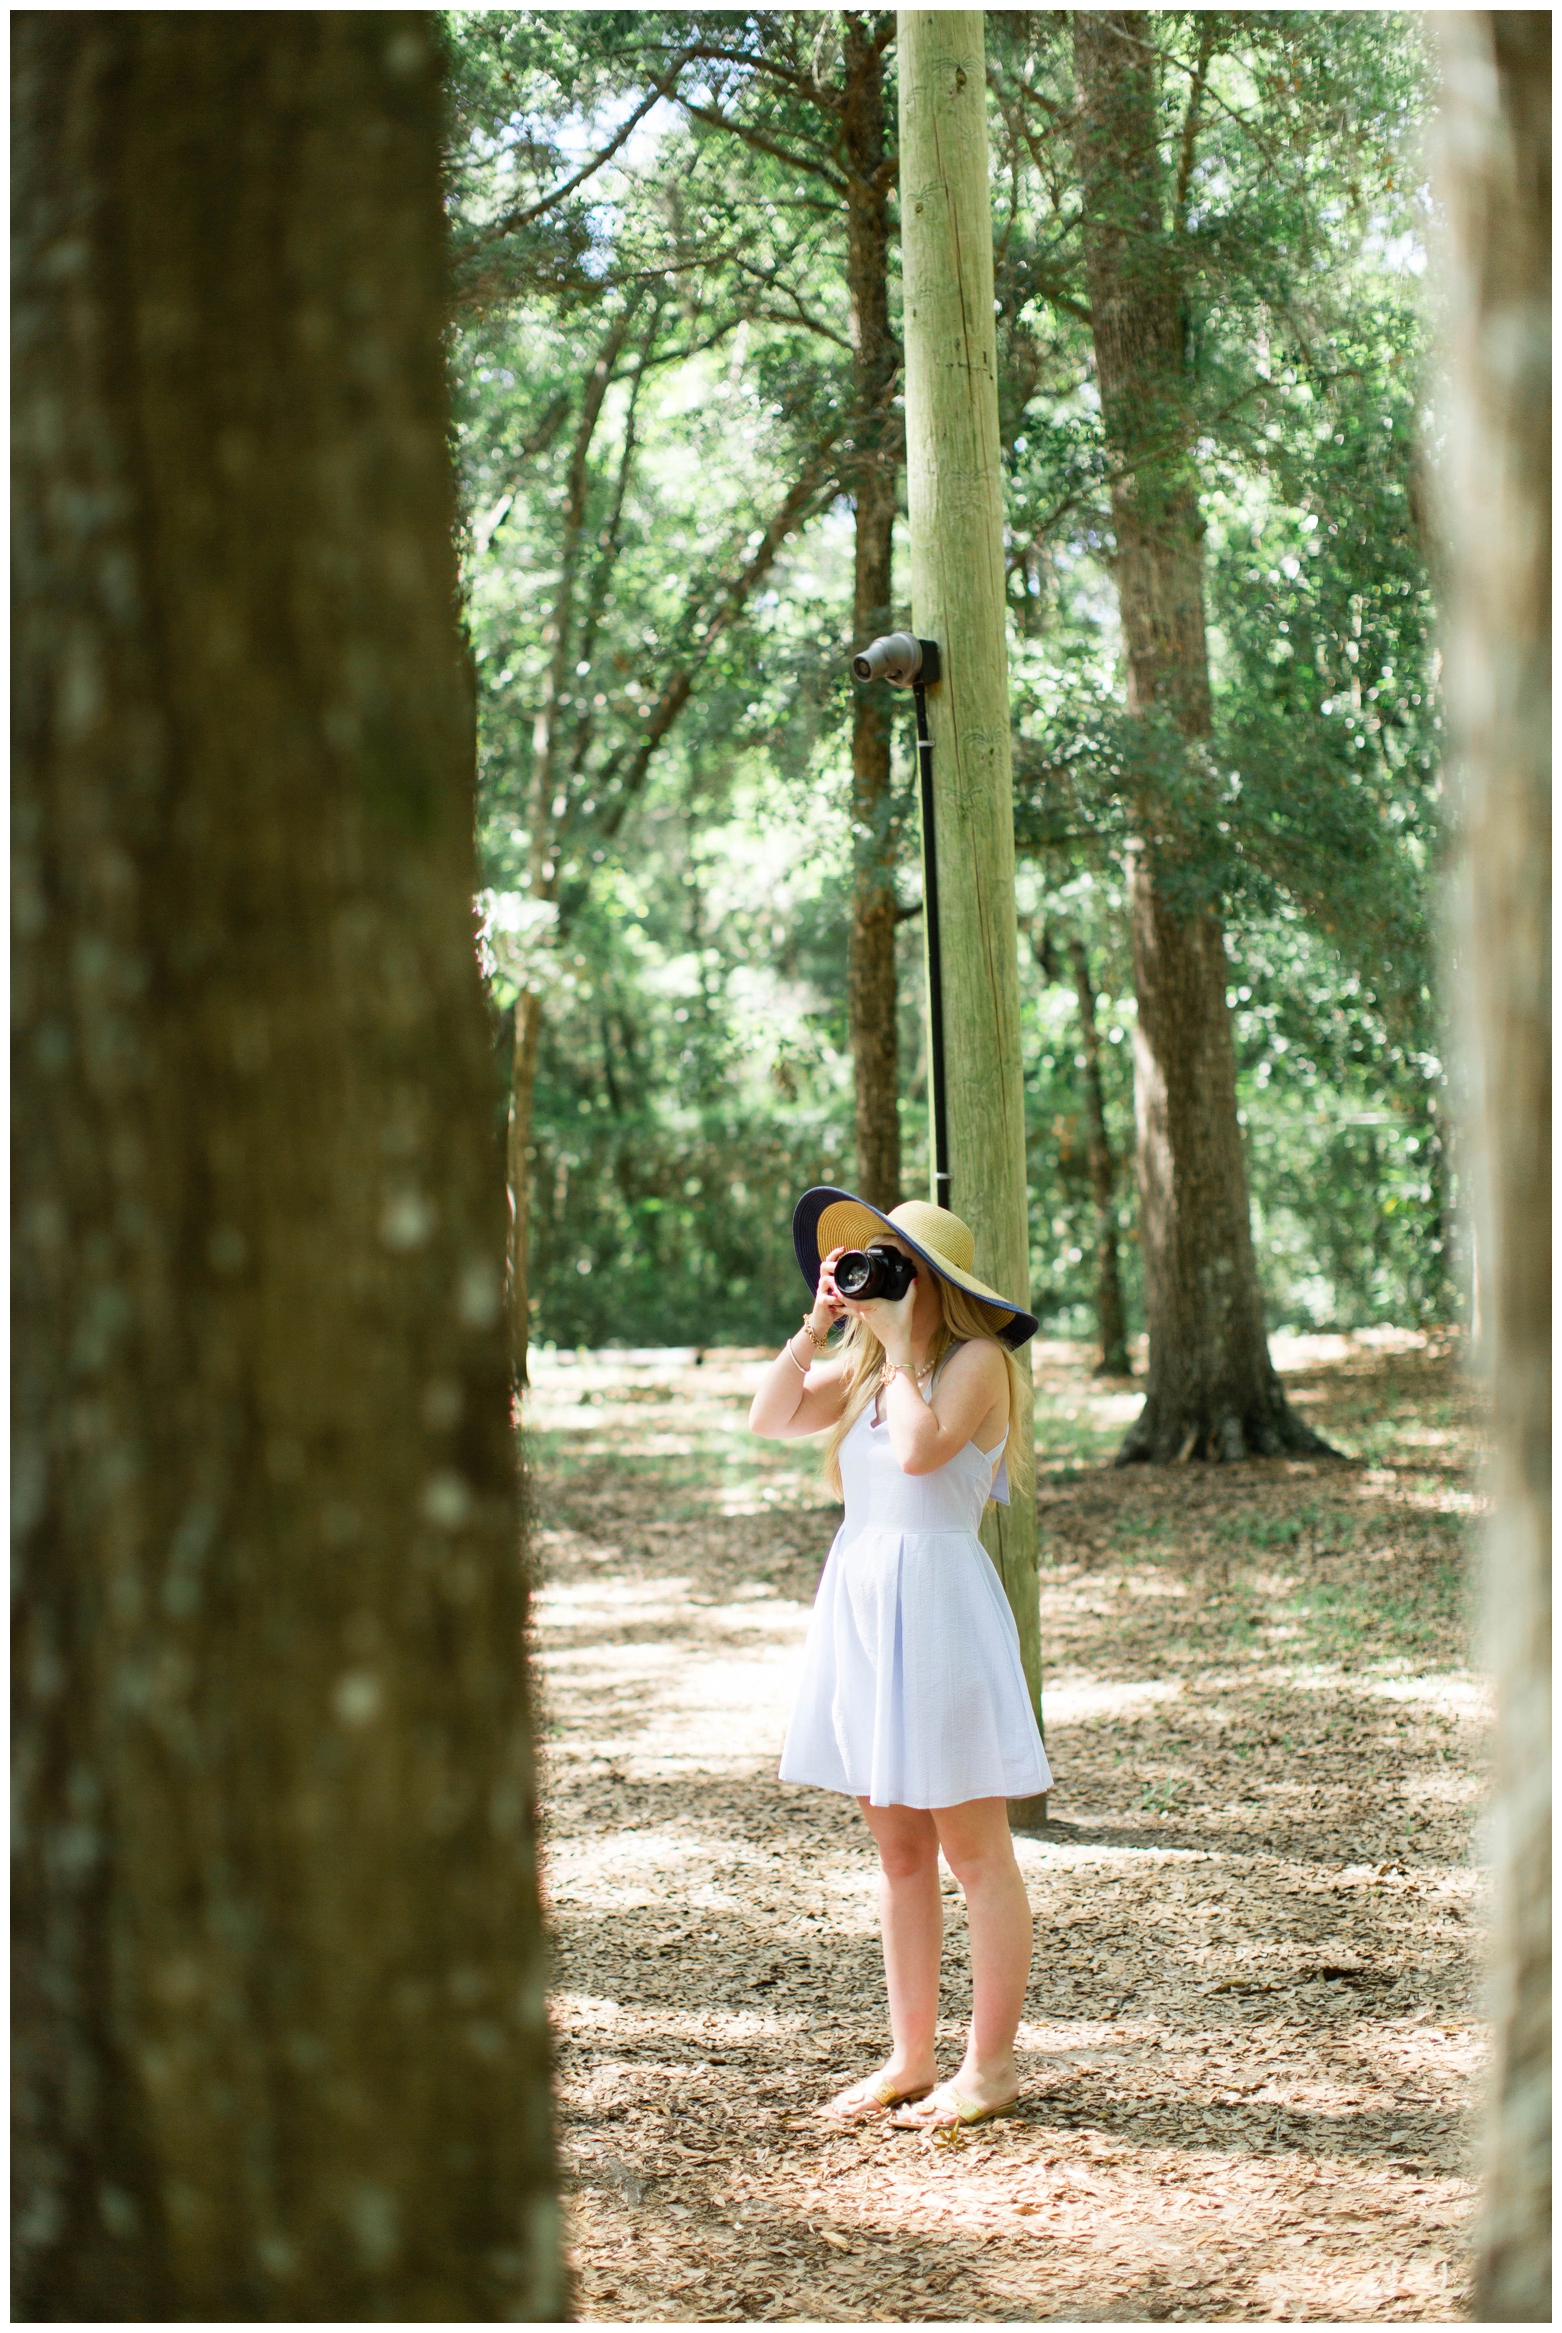 View More: http://nataliejaynephotography.pass.us/charlestonsc-hope